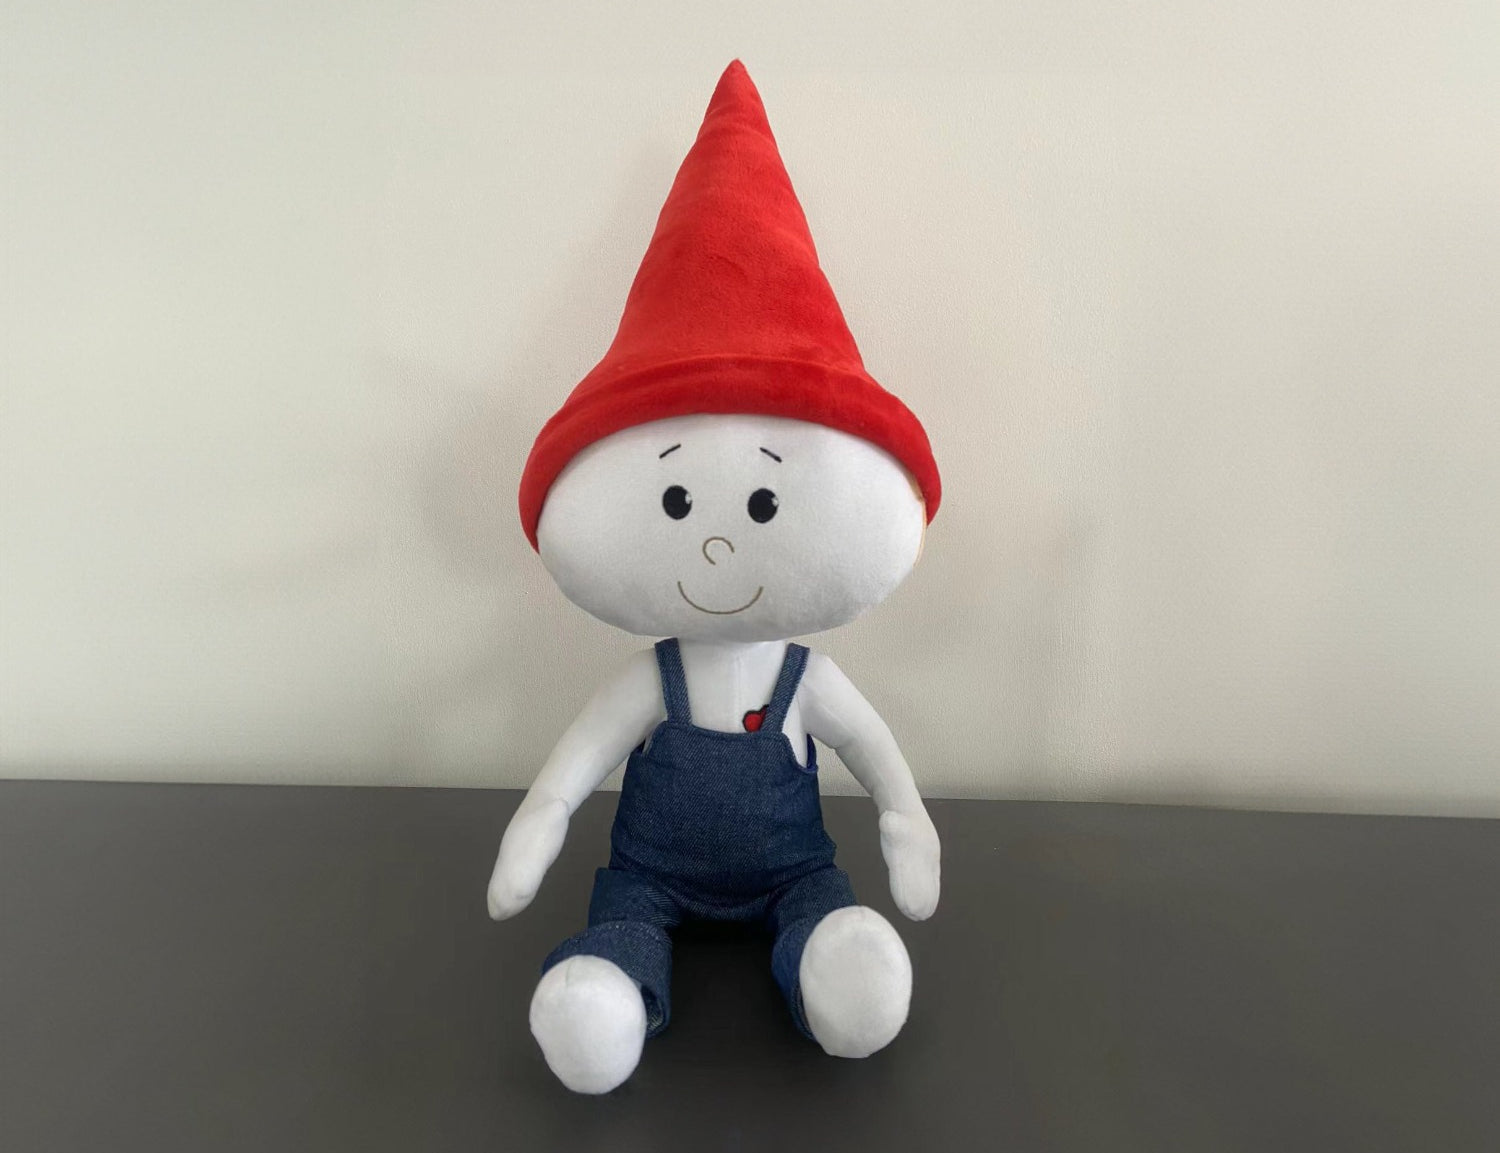 The Gnome Doll is a white stuffed doll with a red pointy gnome hat and blue denim overalls. It is sitting on a gray counter top in front of a white wall.